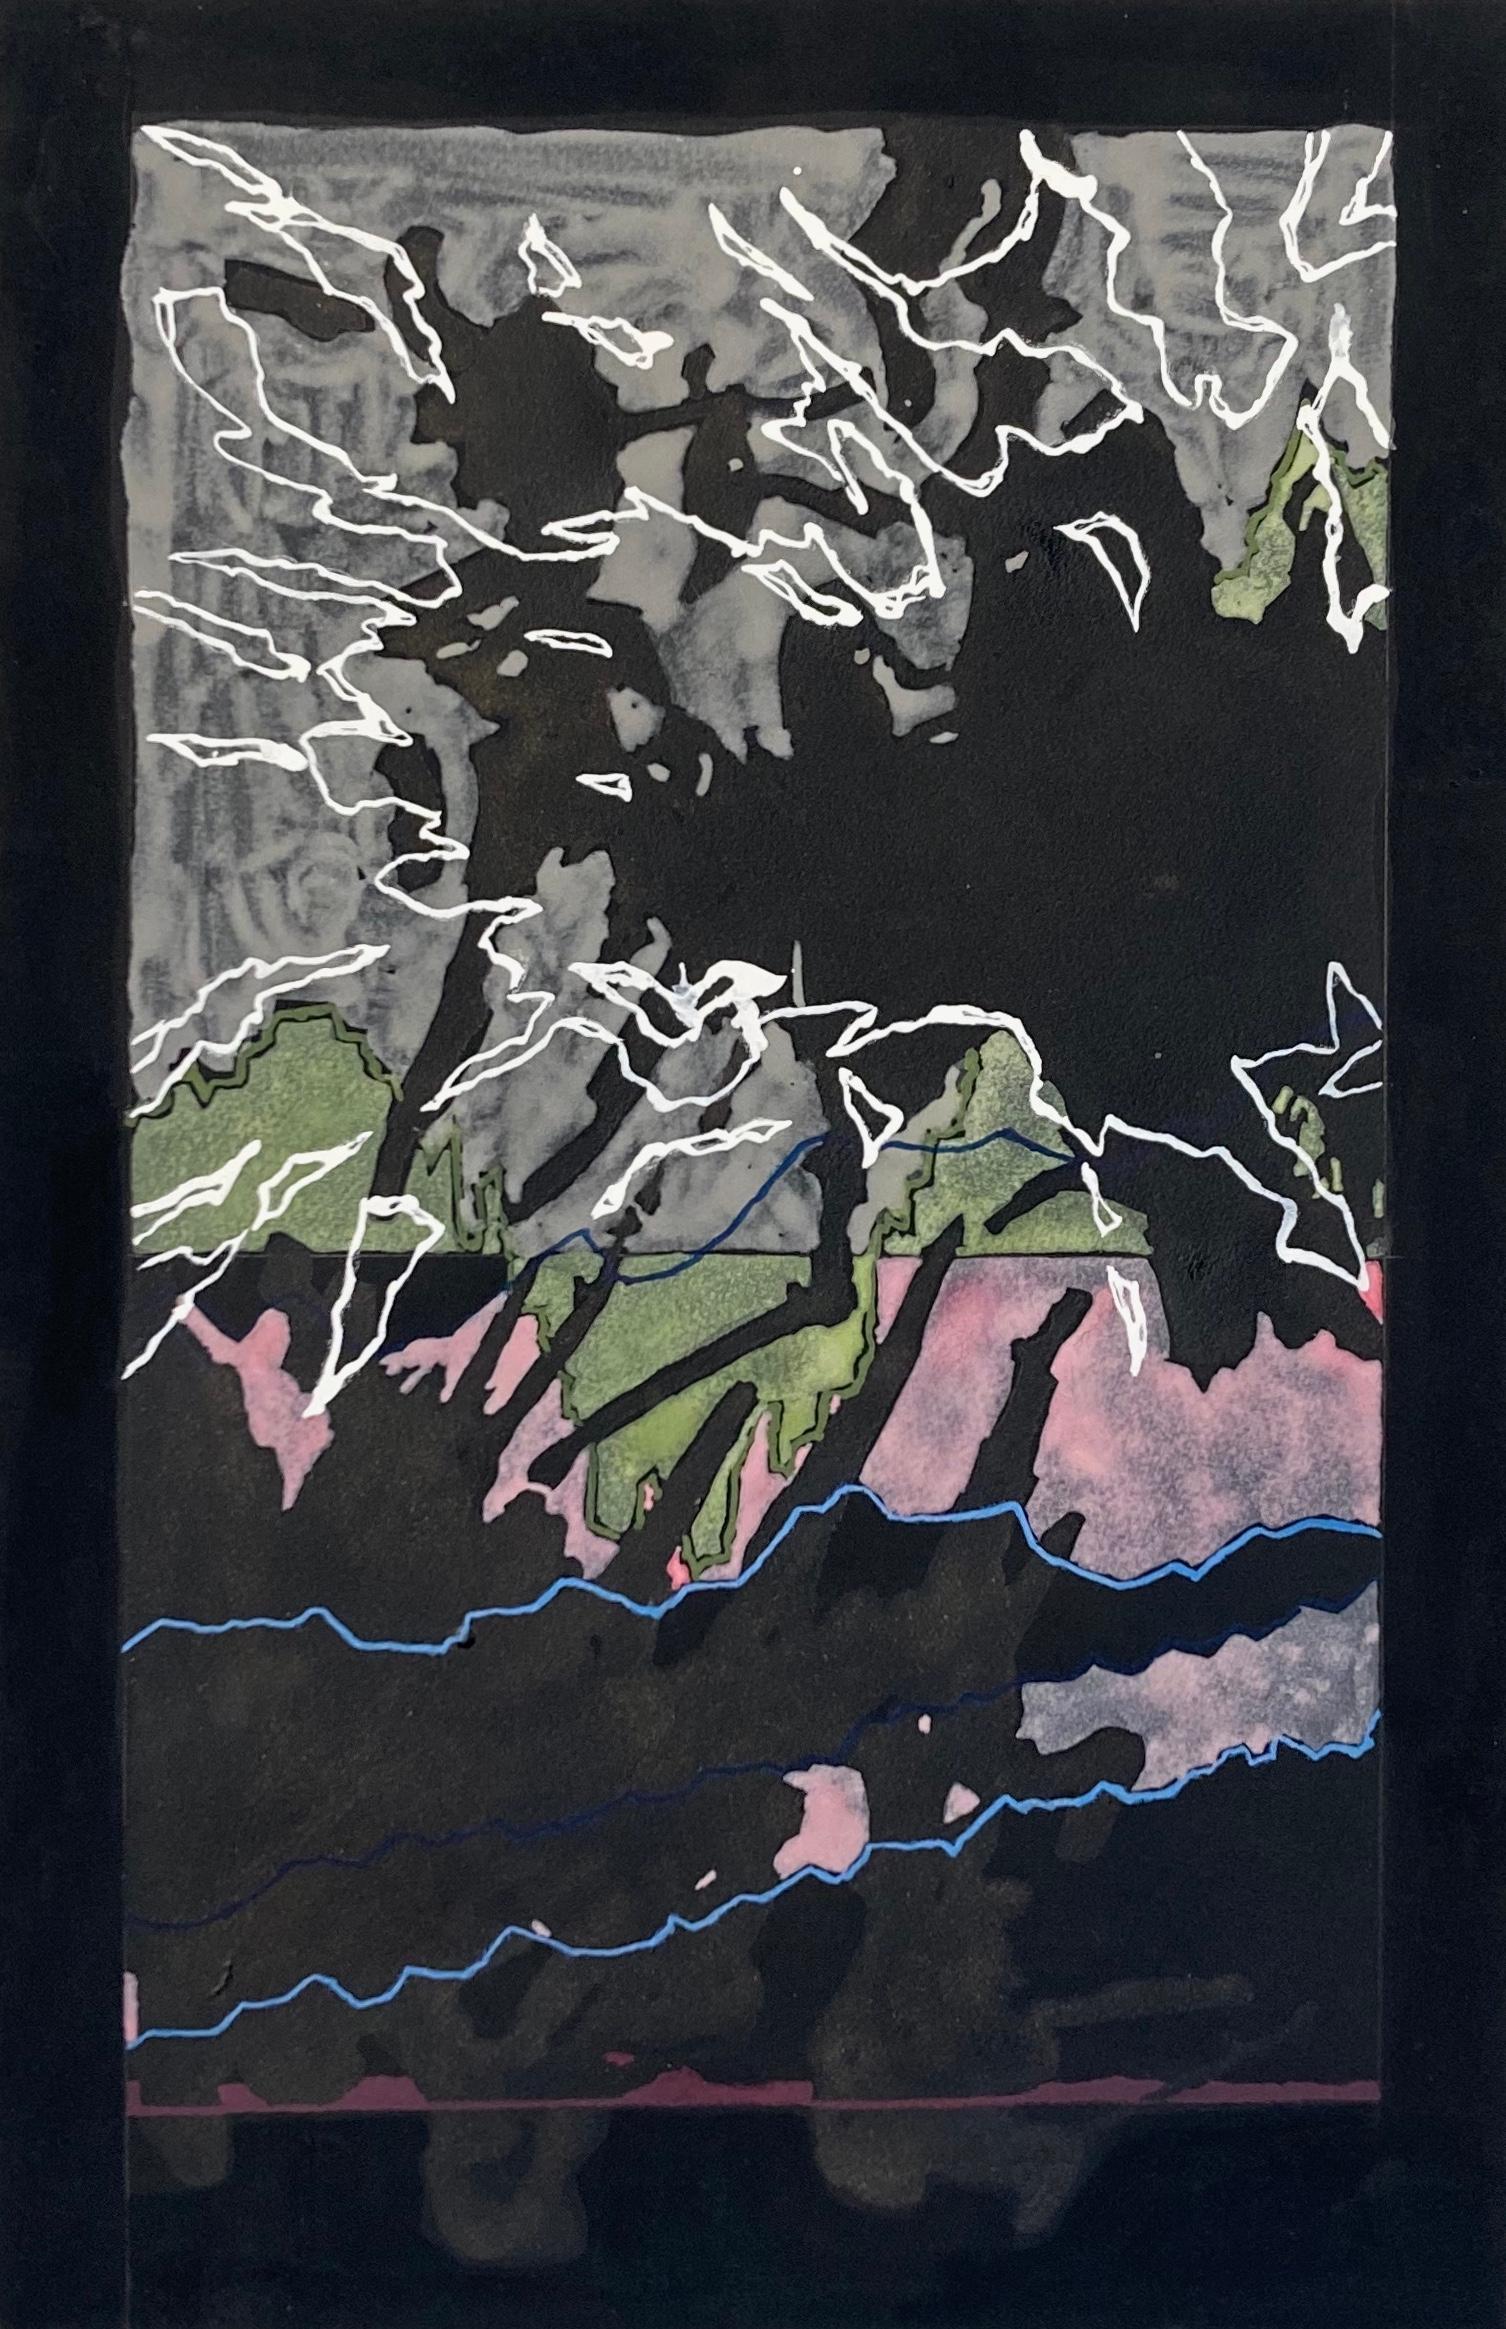 Traces 1: abstract painting/drawing on black paper w/ pink & blue gestural lines